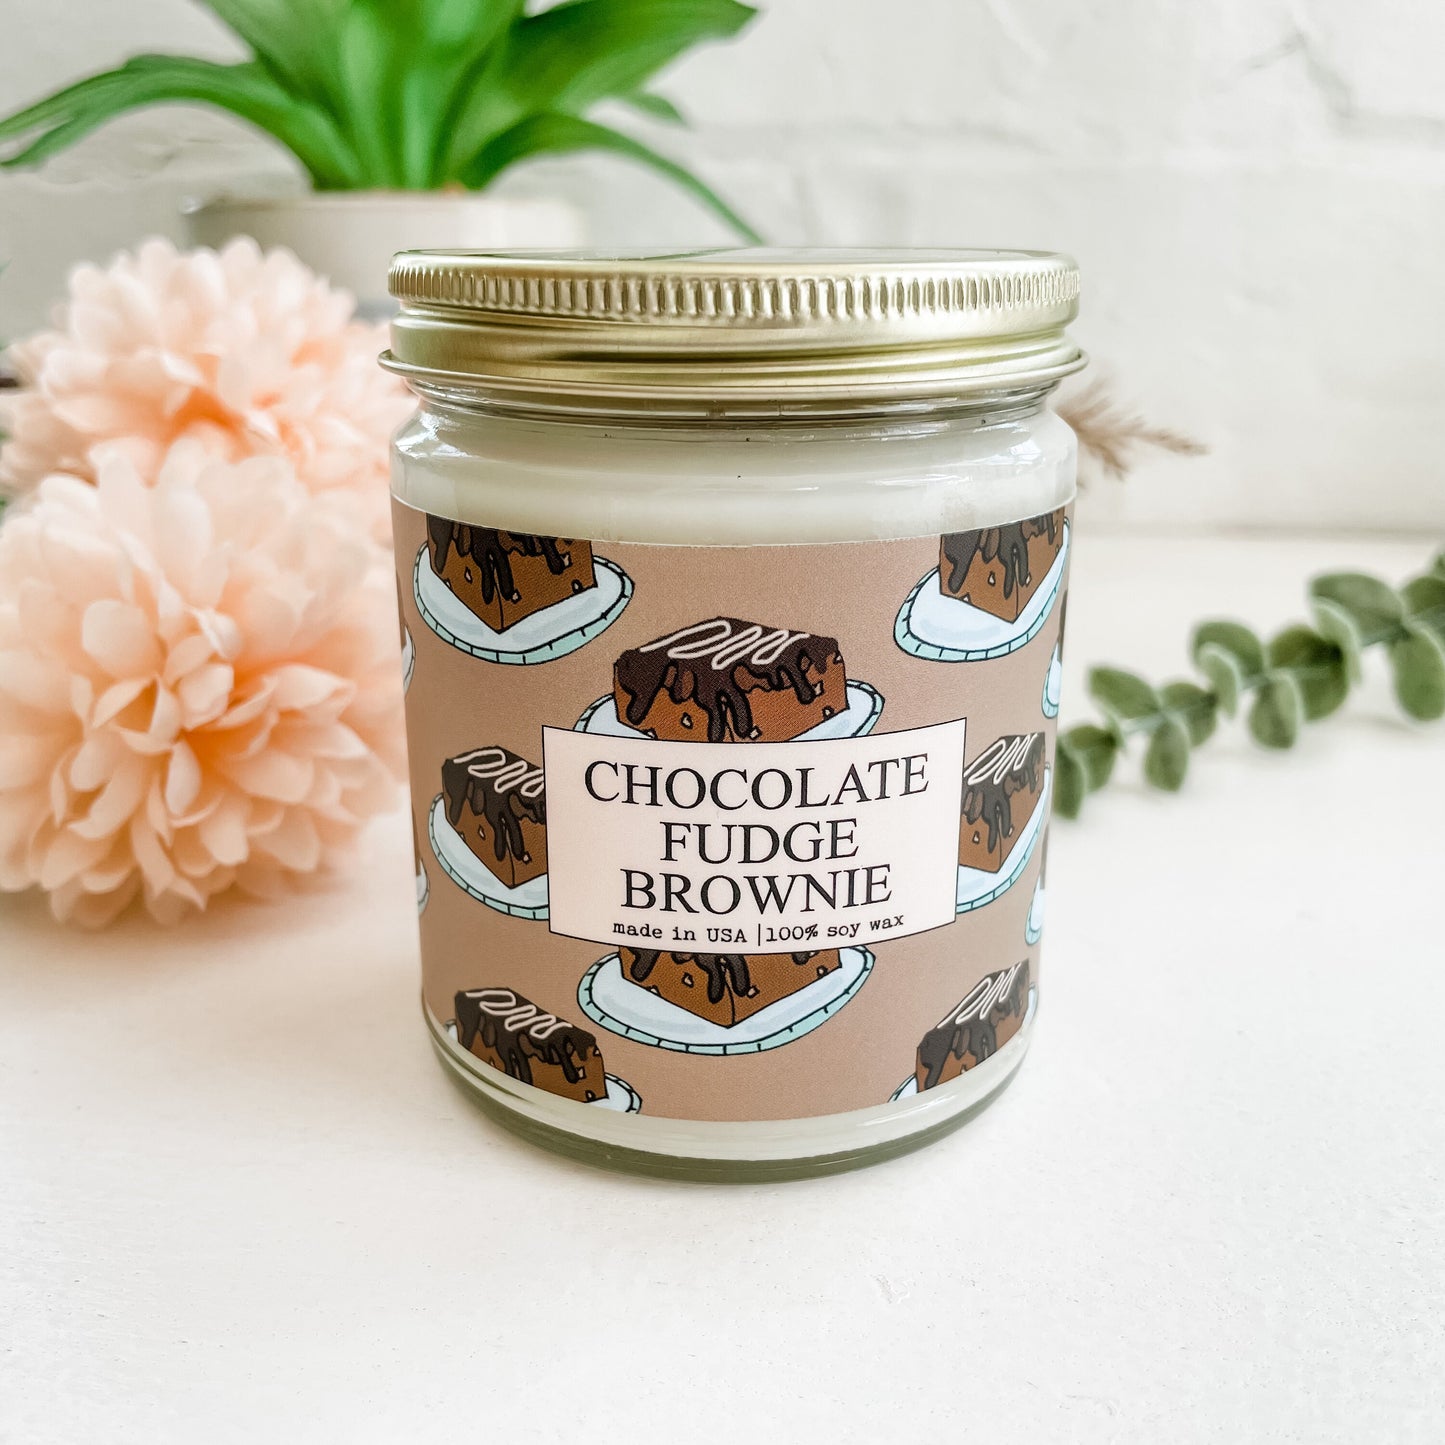 Chocolate Fudge Brownie Scented Candle - 9oz Glass Jar Soy Candle